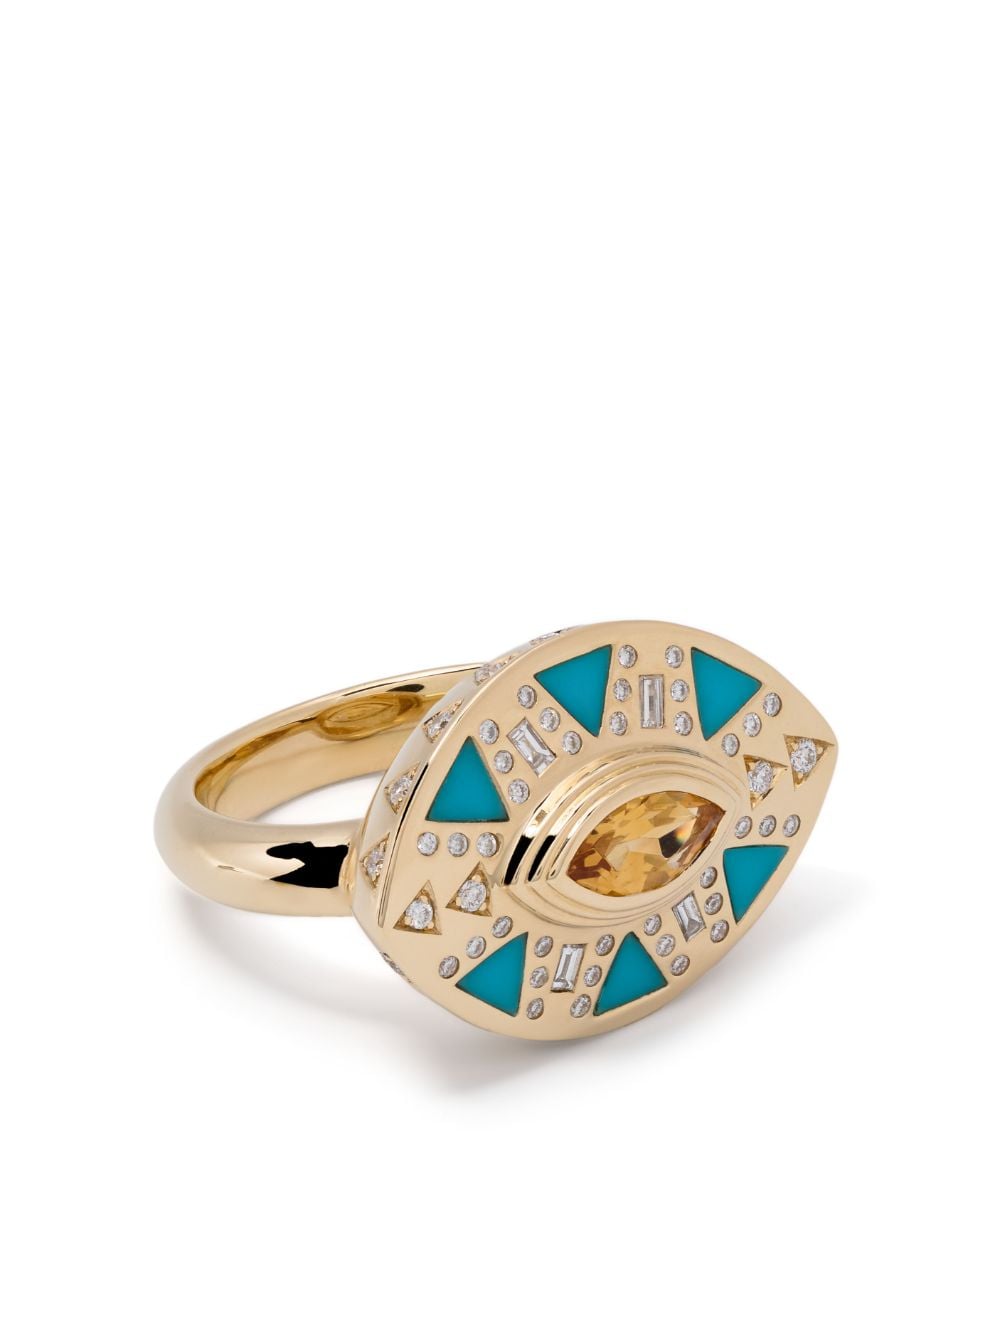 Harwell Godfrey 18kt yellow gold Cleopatra's Tear turquoise cocktail ring von Harwell Godfrey